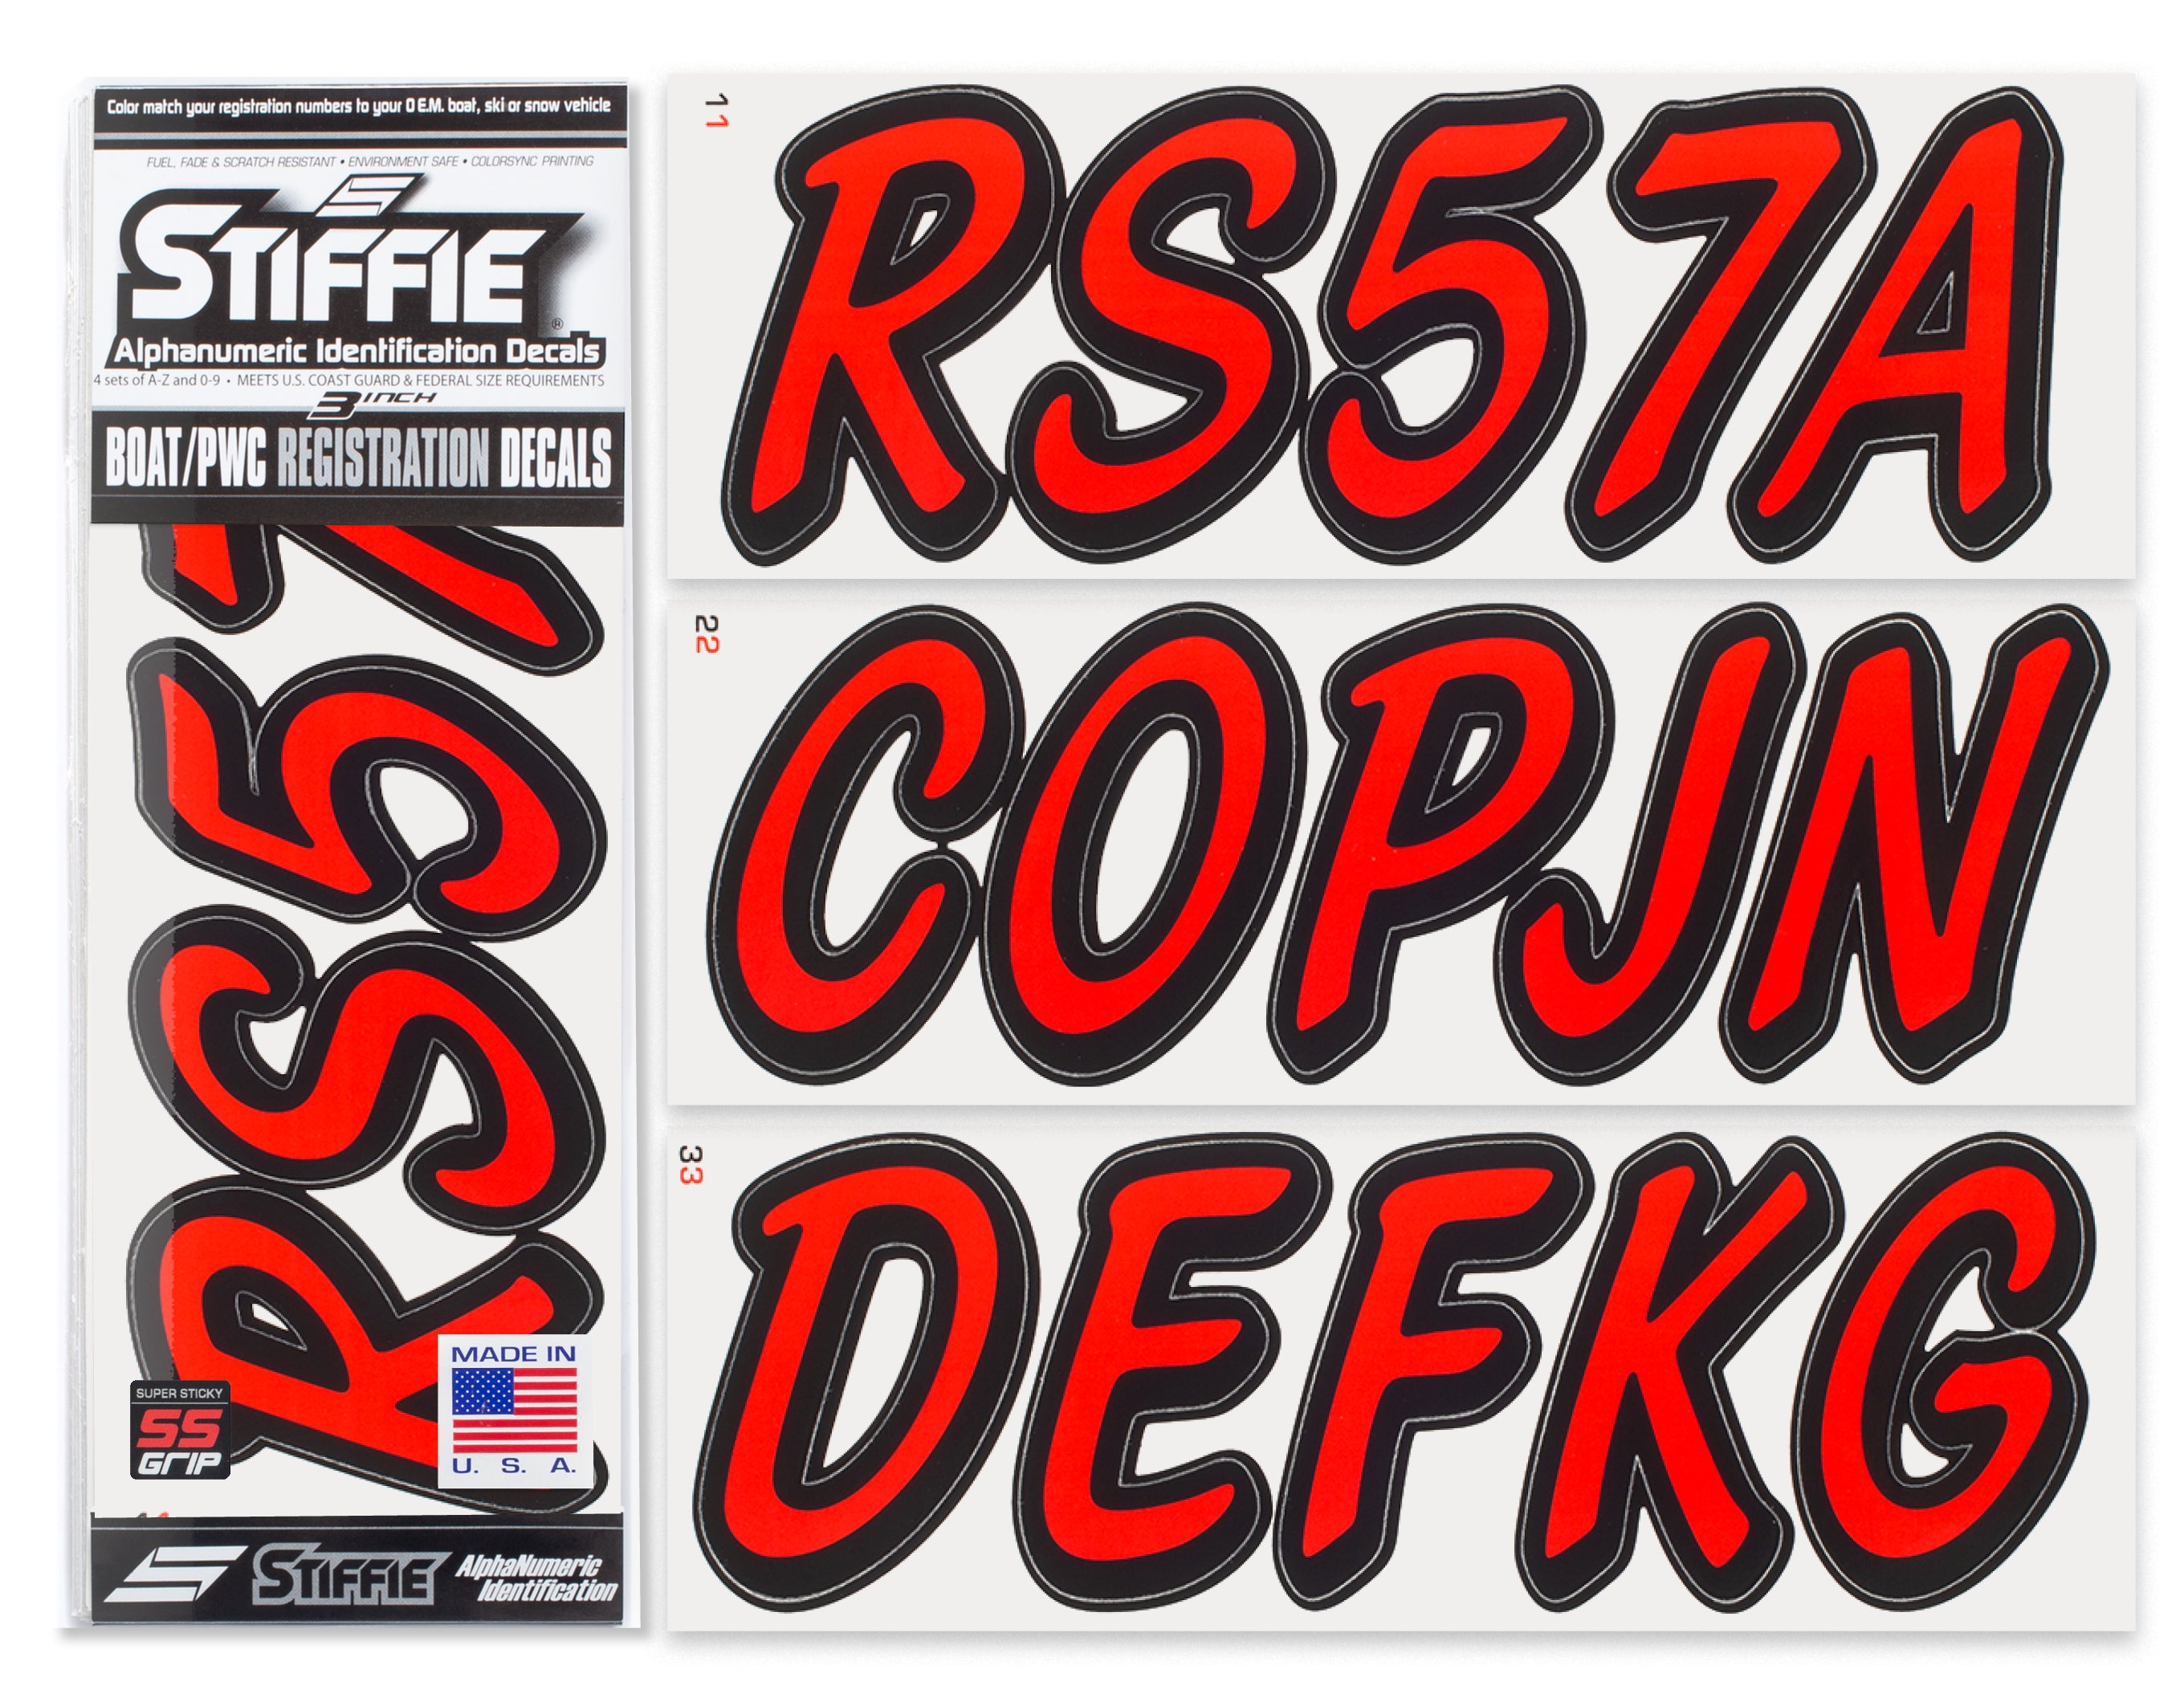 STIFFIE Whipline Solid Lava Red/Black Super Sticky 3" Alpha-Numeric Registration Identification Numbers Stickers Decals for Boats & Personal Watercraft